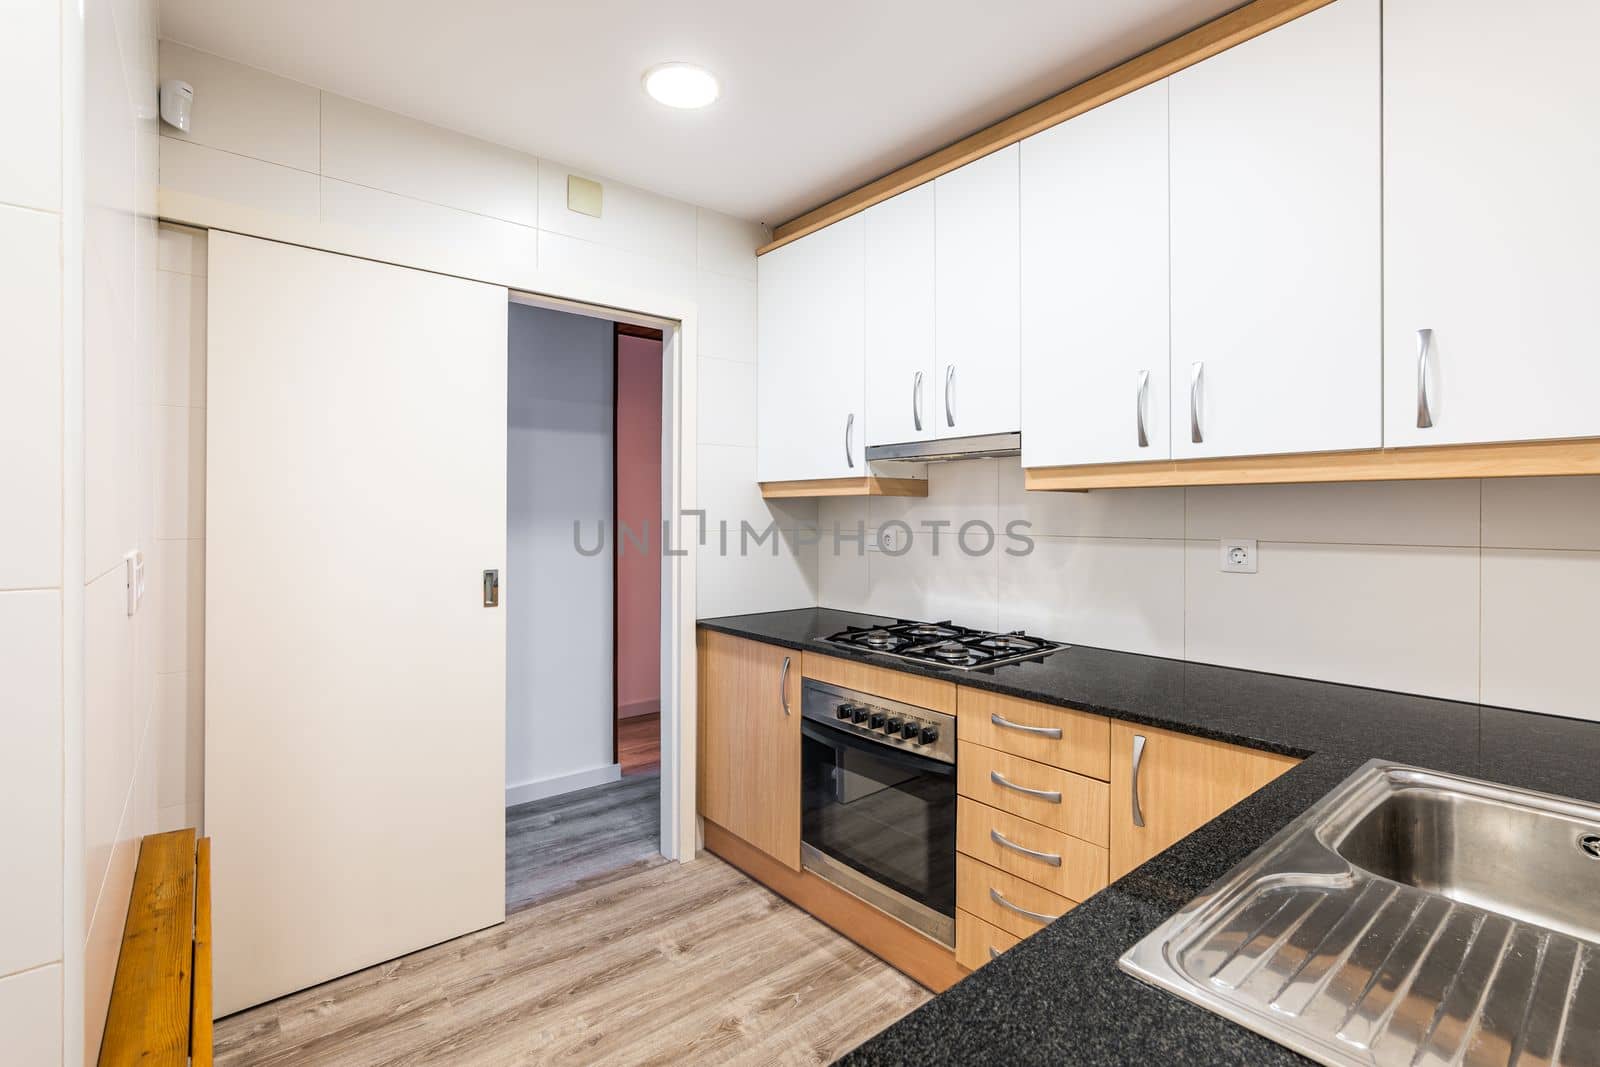 Modular furniture in kitchen with white cabinets on top of wall and cabinets with wood doors below. Black worktop with gas stove. On wall opposite, there is folding solid wood tabletop to save space